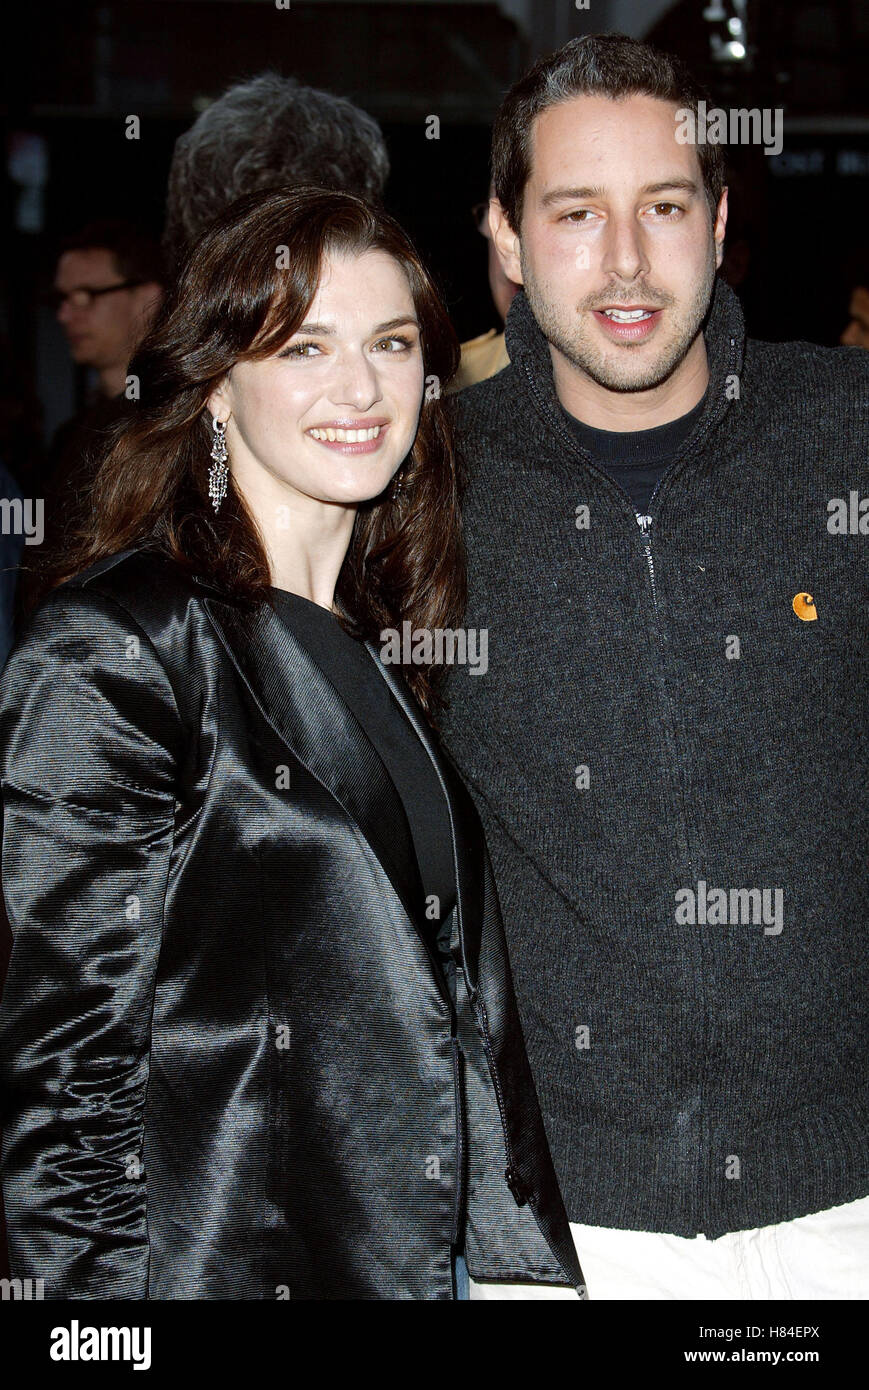 RACHEL WEISZ & JAMIE CATTO 1 GIANT LEAP FILM PREMIERE EGYPTIAN THEATRE HOLLYWOOD LOS ANGELES USA 06 May 2002 Stock Photo